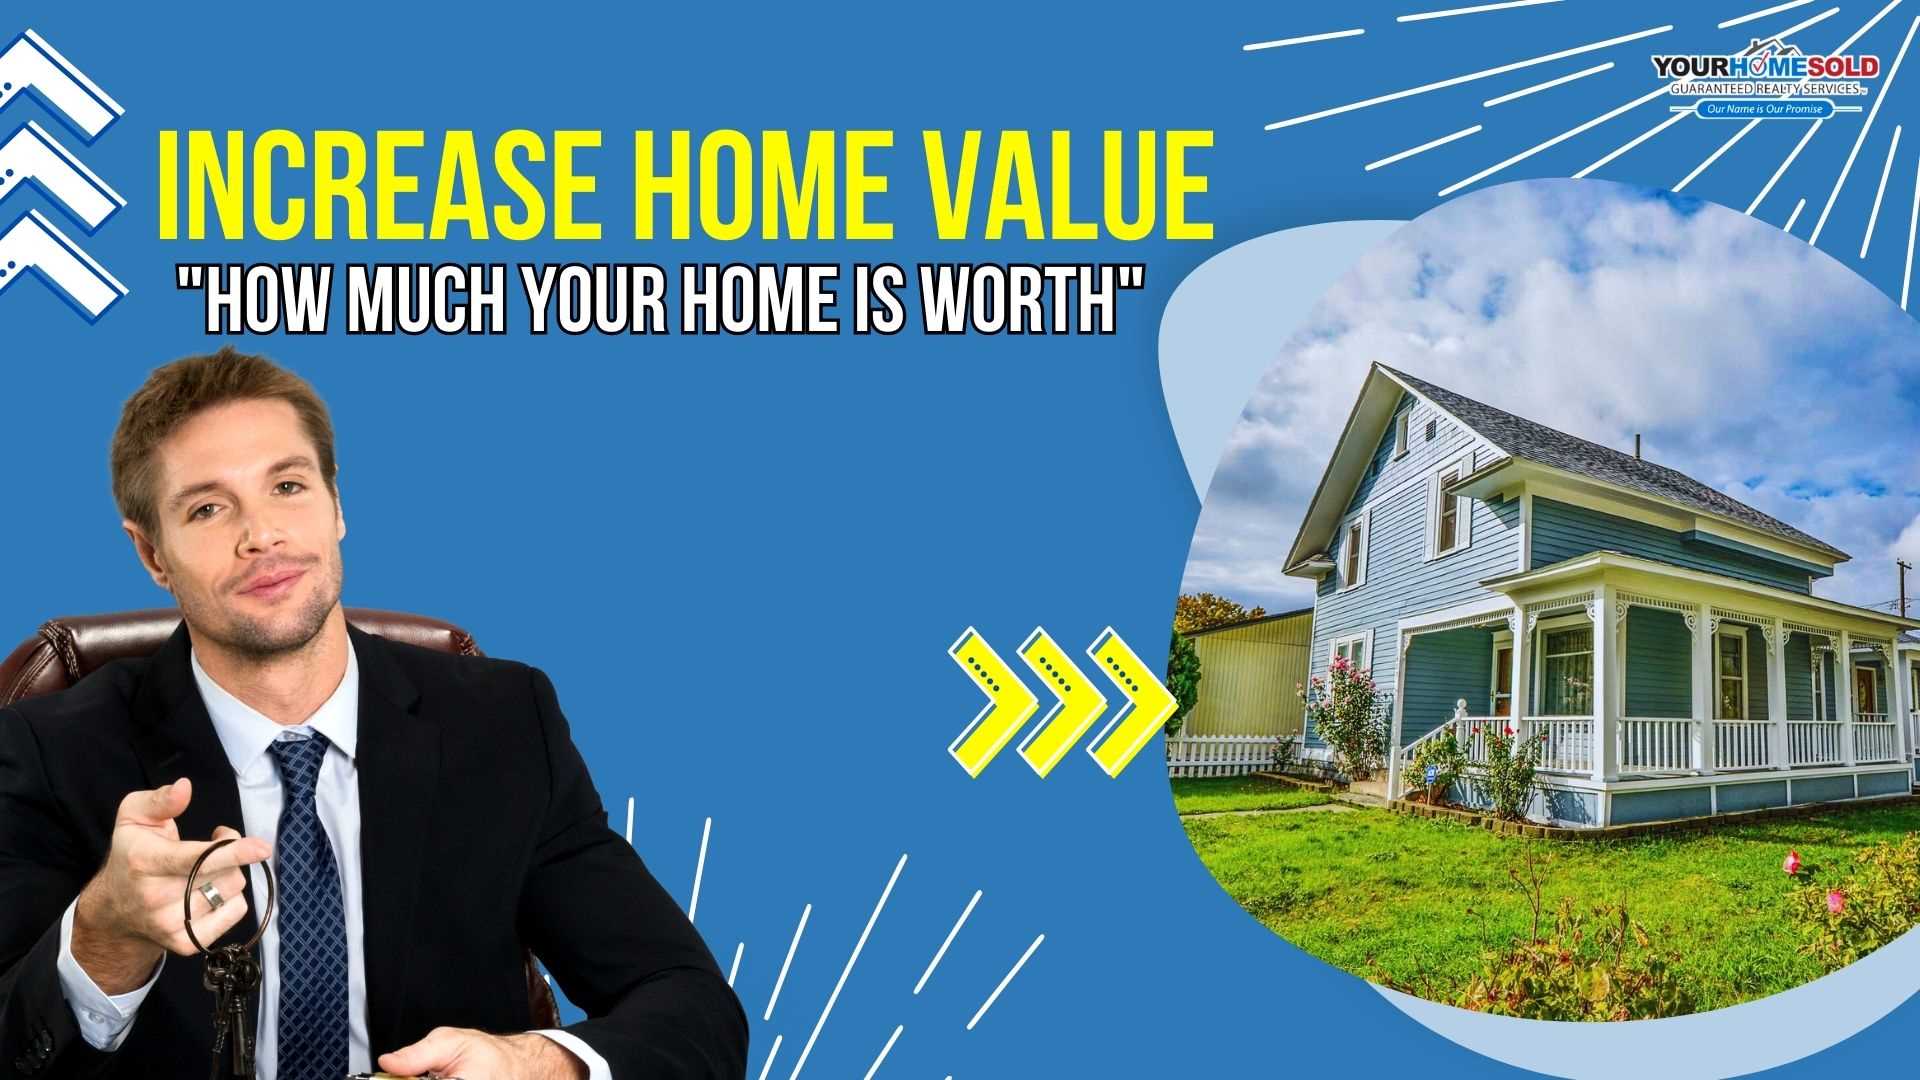 THIS IS THE WAY TO SAFEGUARD AND INCREMENT HOME VALUE ON A CAREFUL SPENDING PLAN